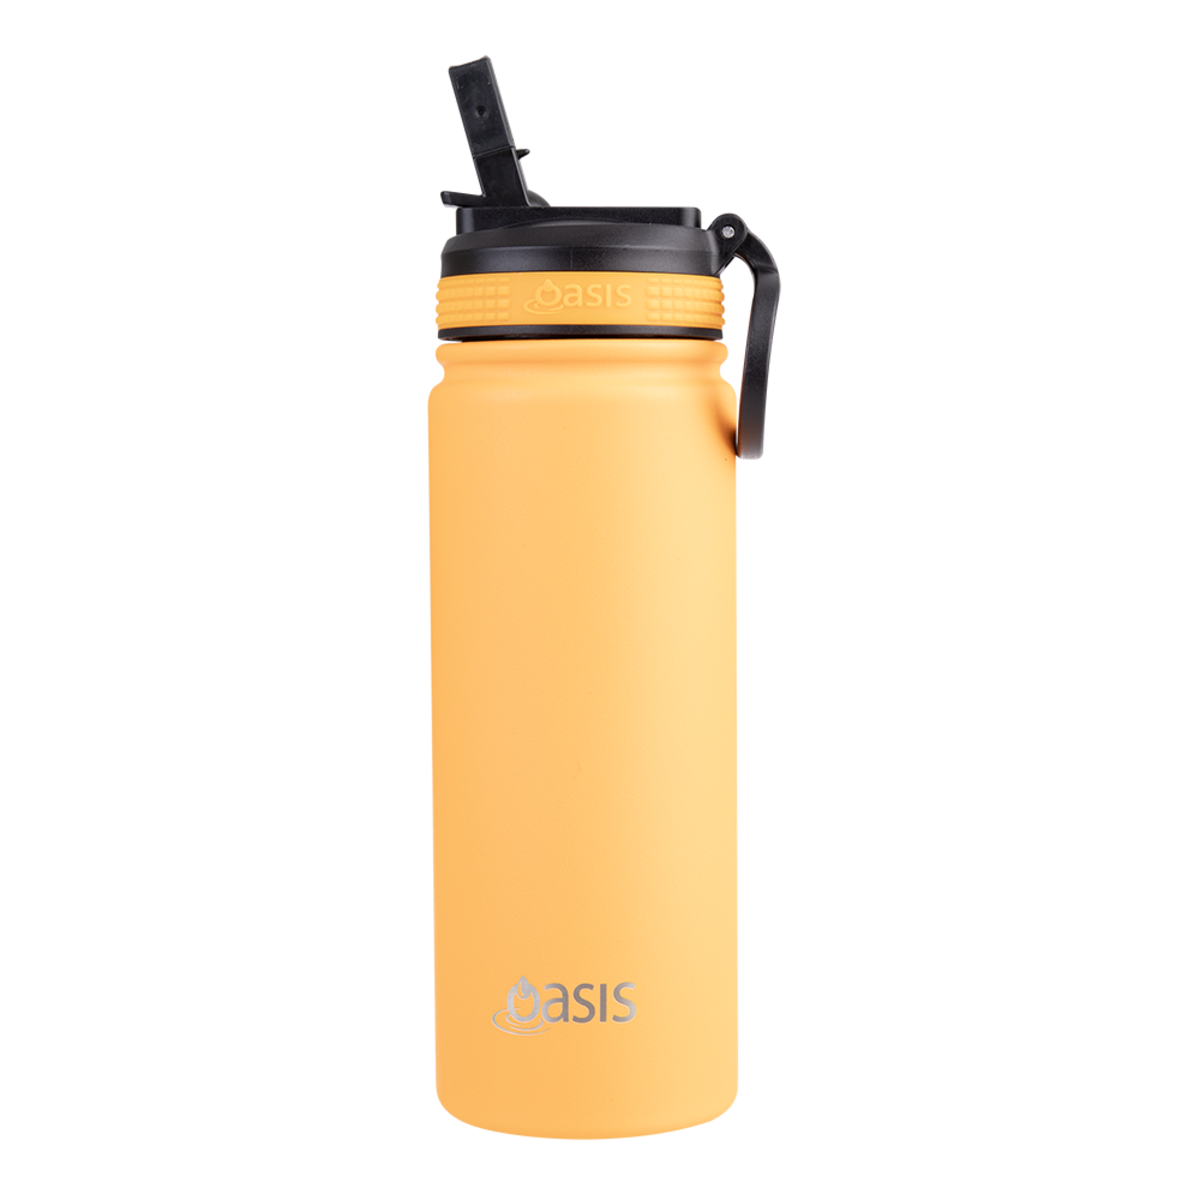 OASIS STAINLESS STEEL DOUBLE WALL INSULATED "CHALLENGER" SPORTS BOTTLE W/ SIPPER STRAW 550ML - Neon Orange